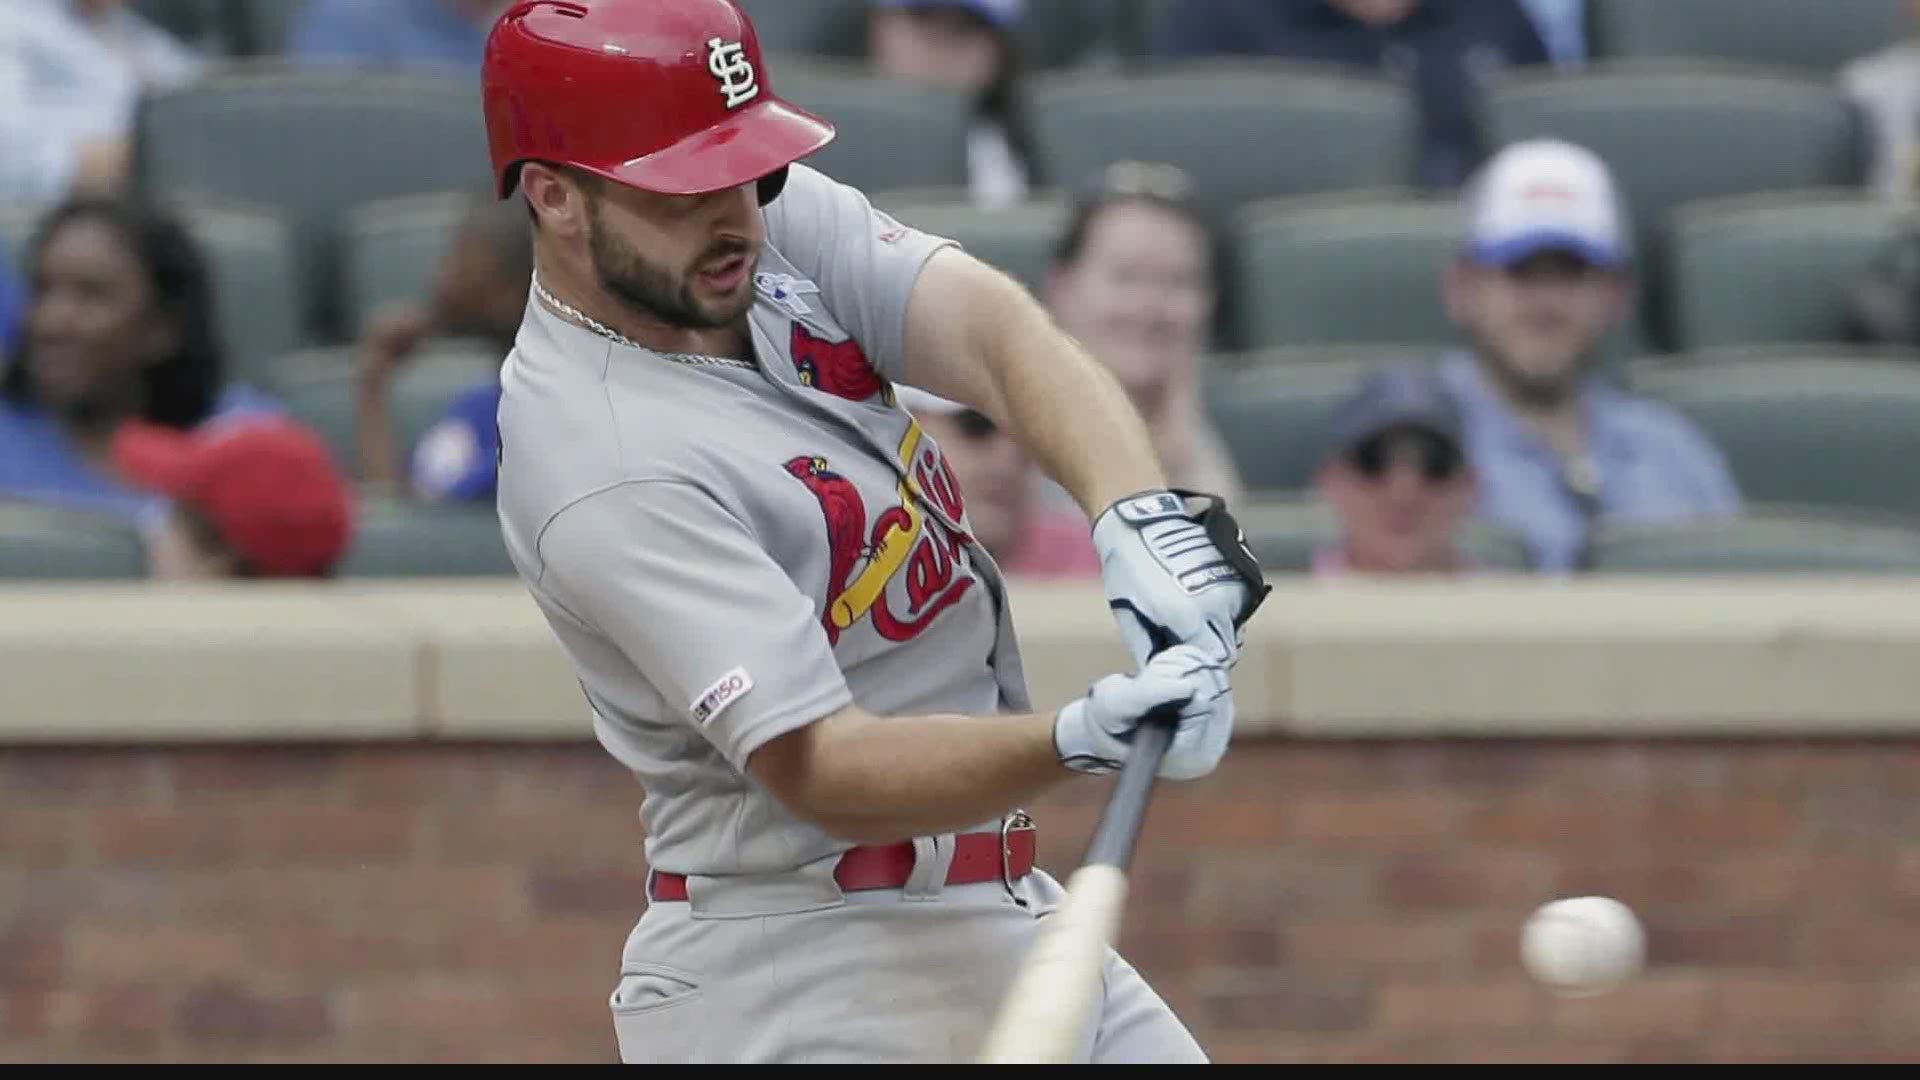 As Mother’s Day approaches, Cardinals’ player Paul DeJong talks about his childhood and his relationship with his mom.